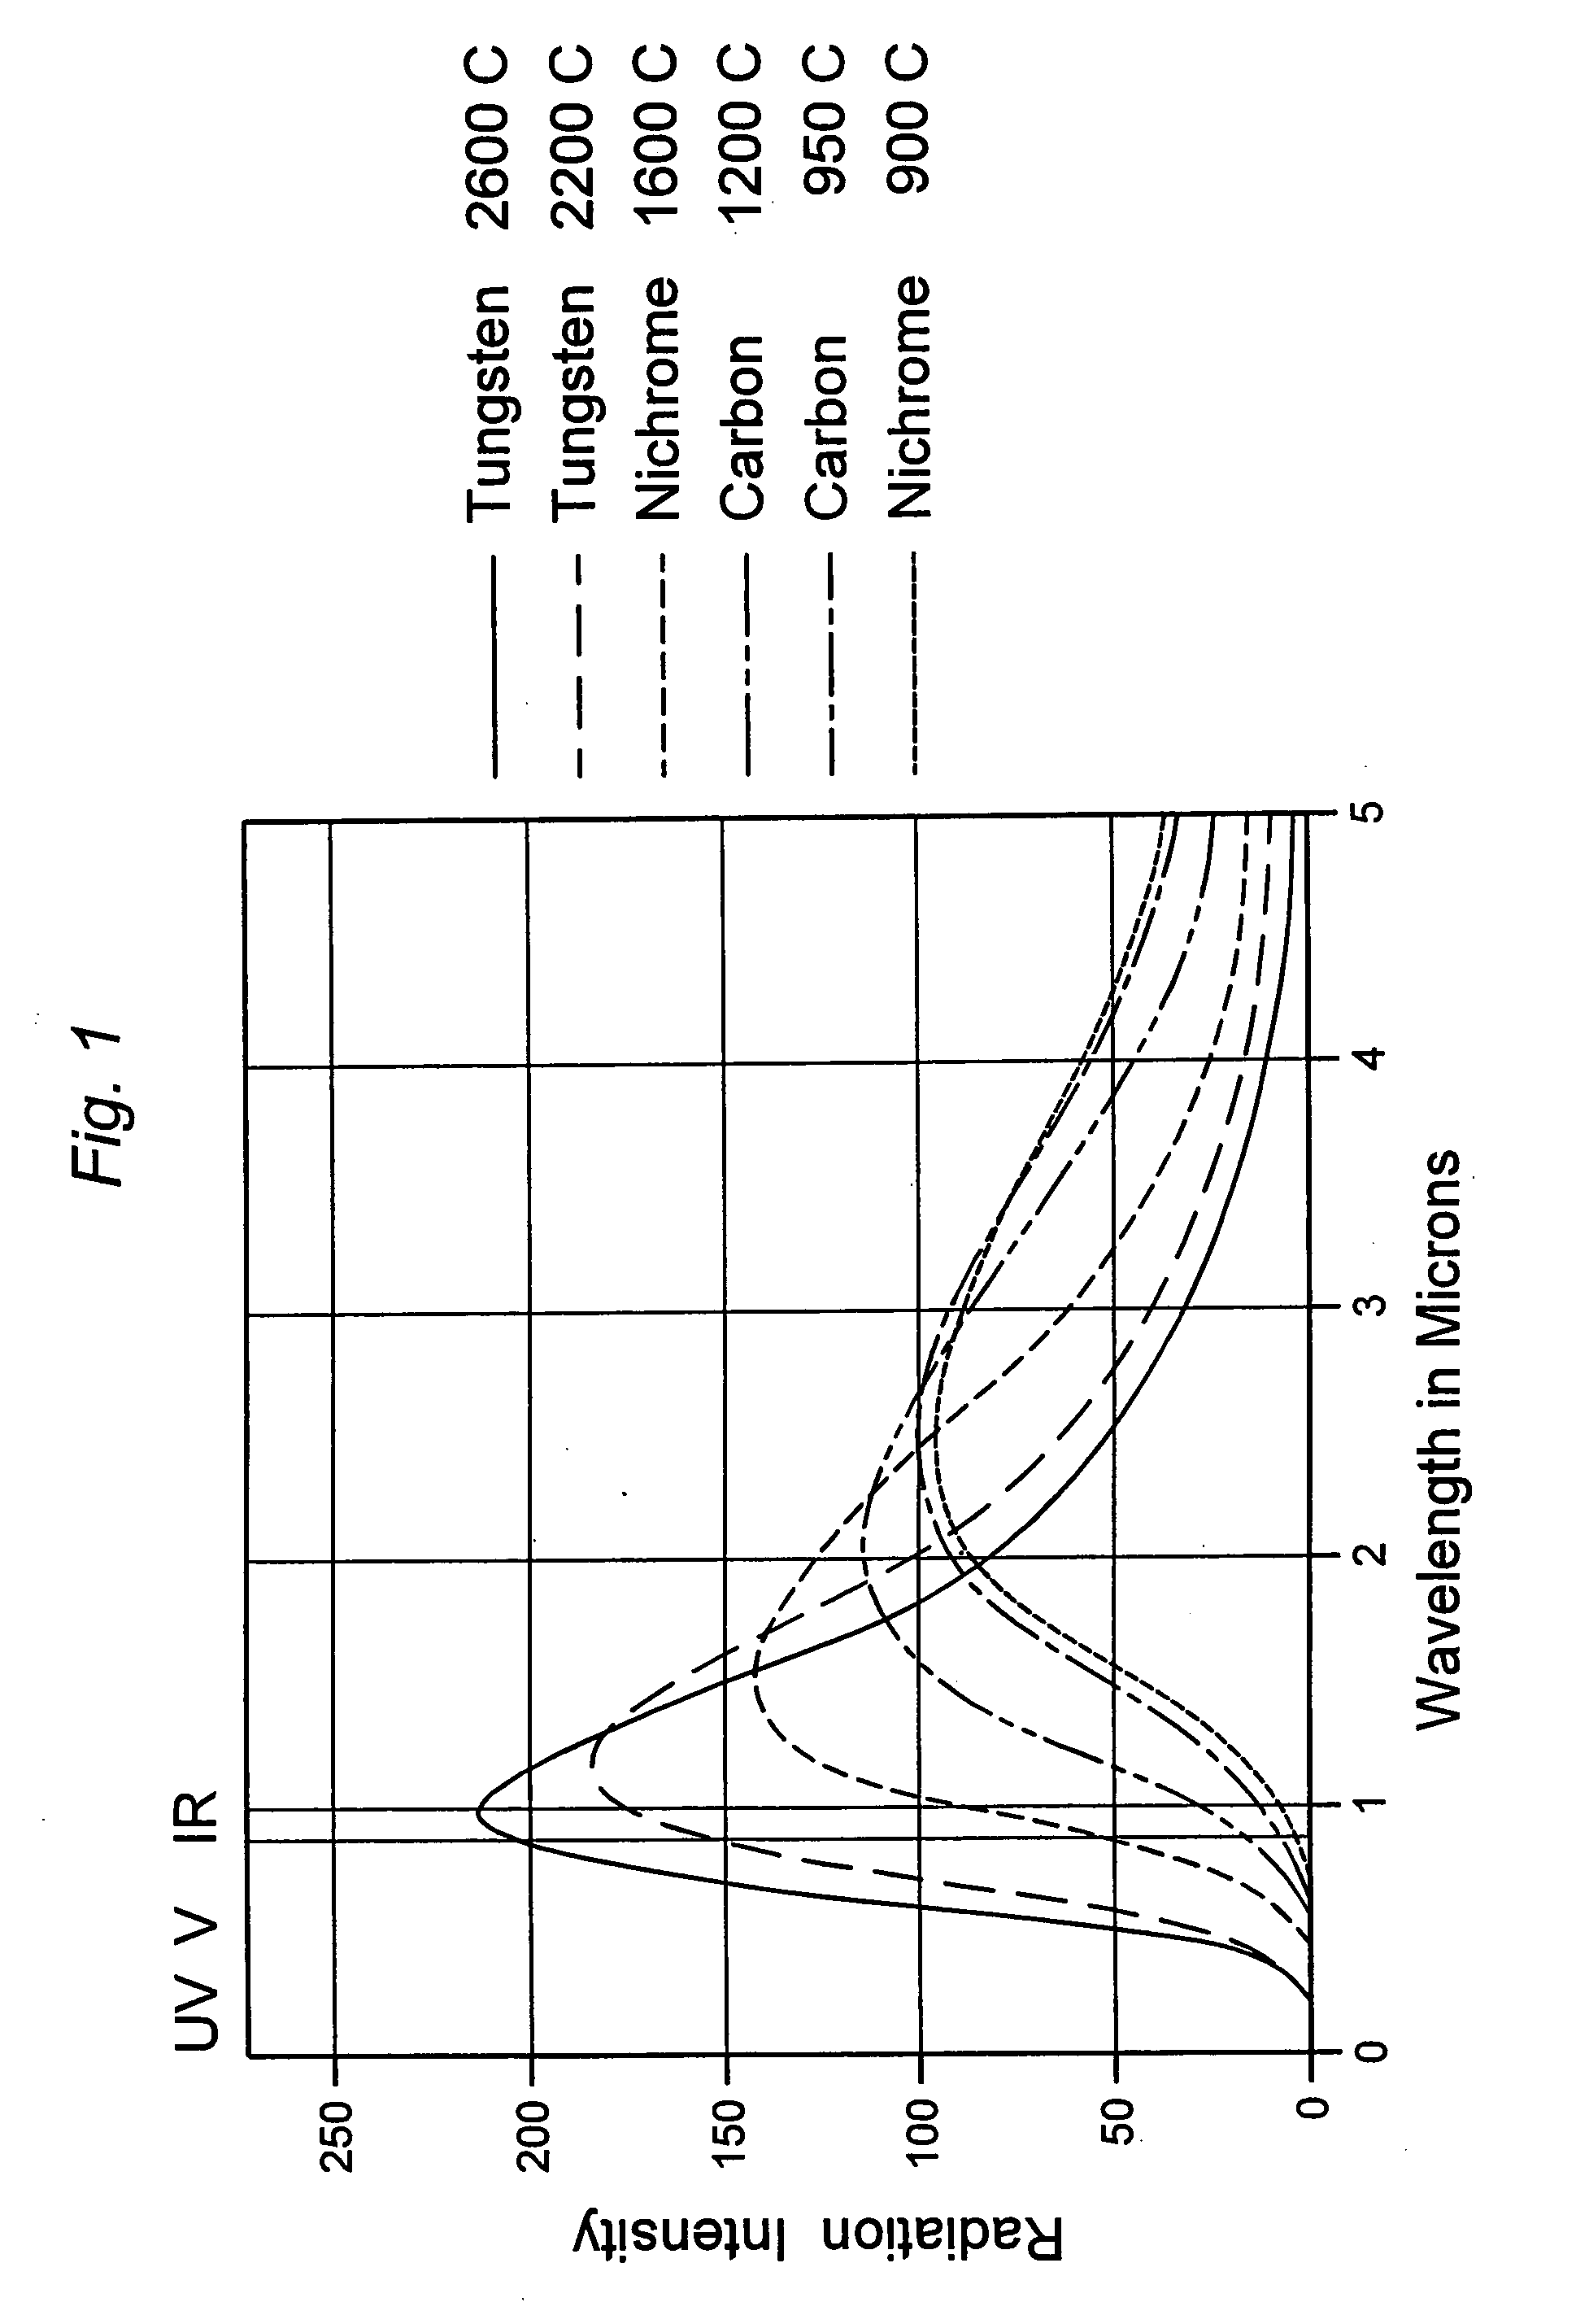 Targeted radiation treatment using a spectrally selective radiation emitter